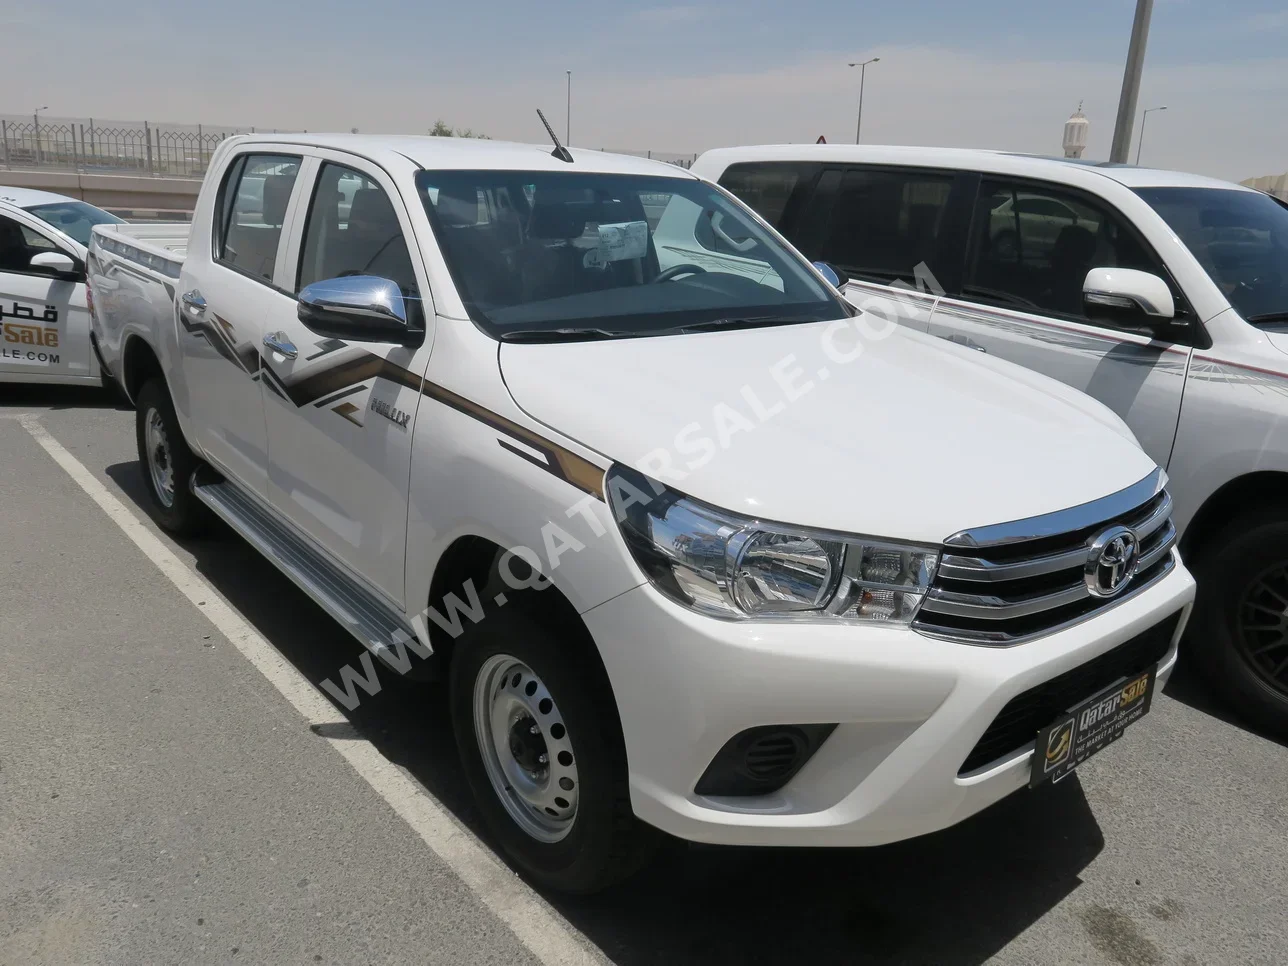 Toyota  Hilux  2024  Automatic  0 Km  4 Cylinder  Four Wheel Drive (4WD)  Pick Up  White  With Warranty